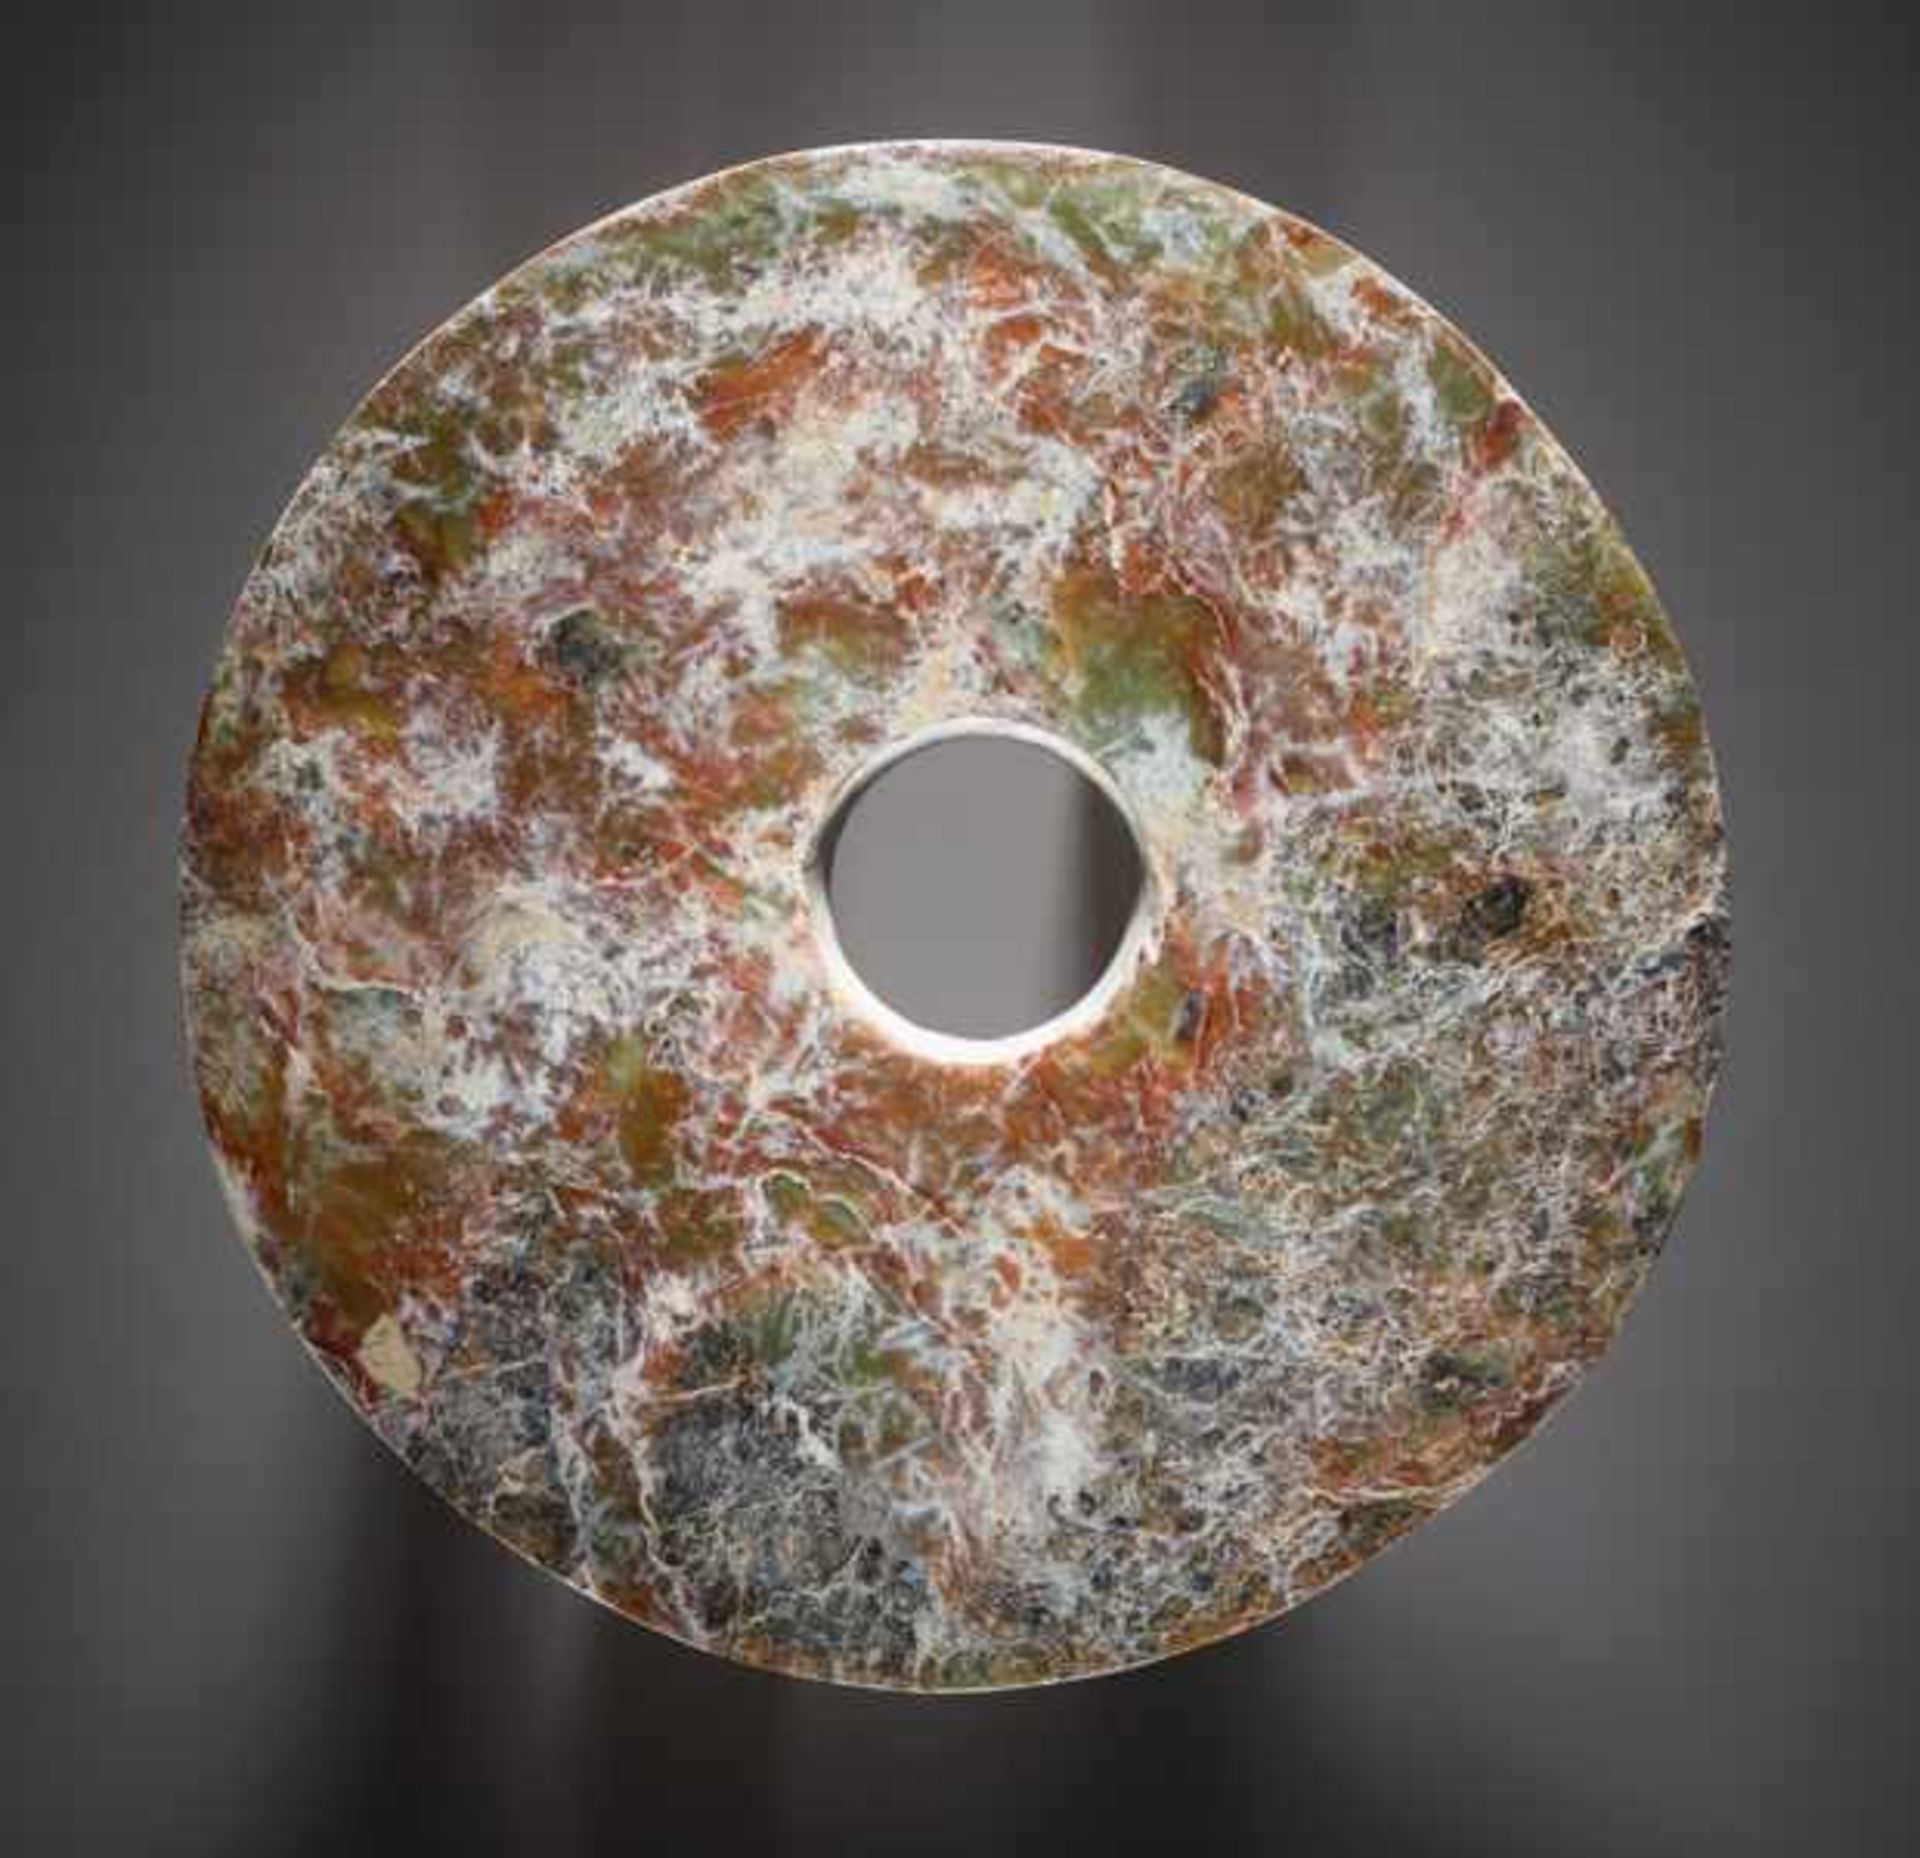 AN IMPOSING BI DISC WITH A FINE-TEXTURED SURFACE AND MIRROR-LIKE POLISH Jade. China, Late Neolithic,